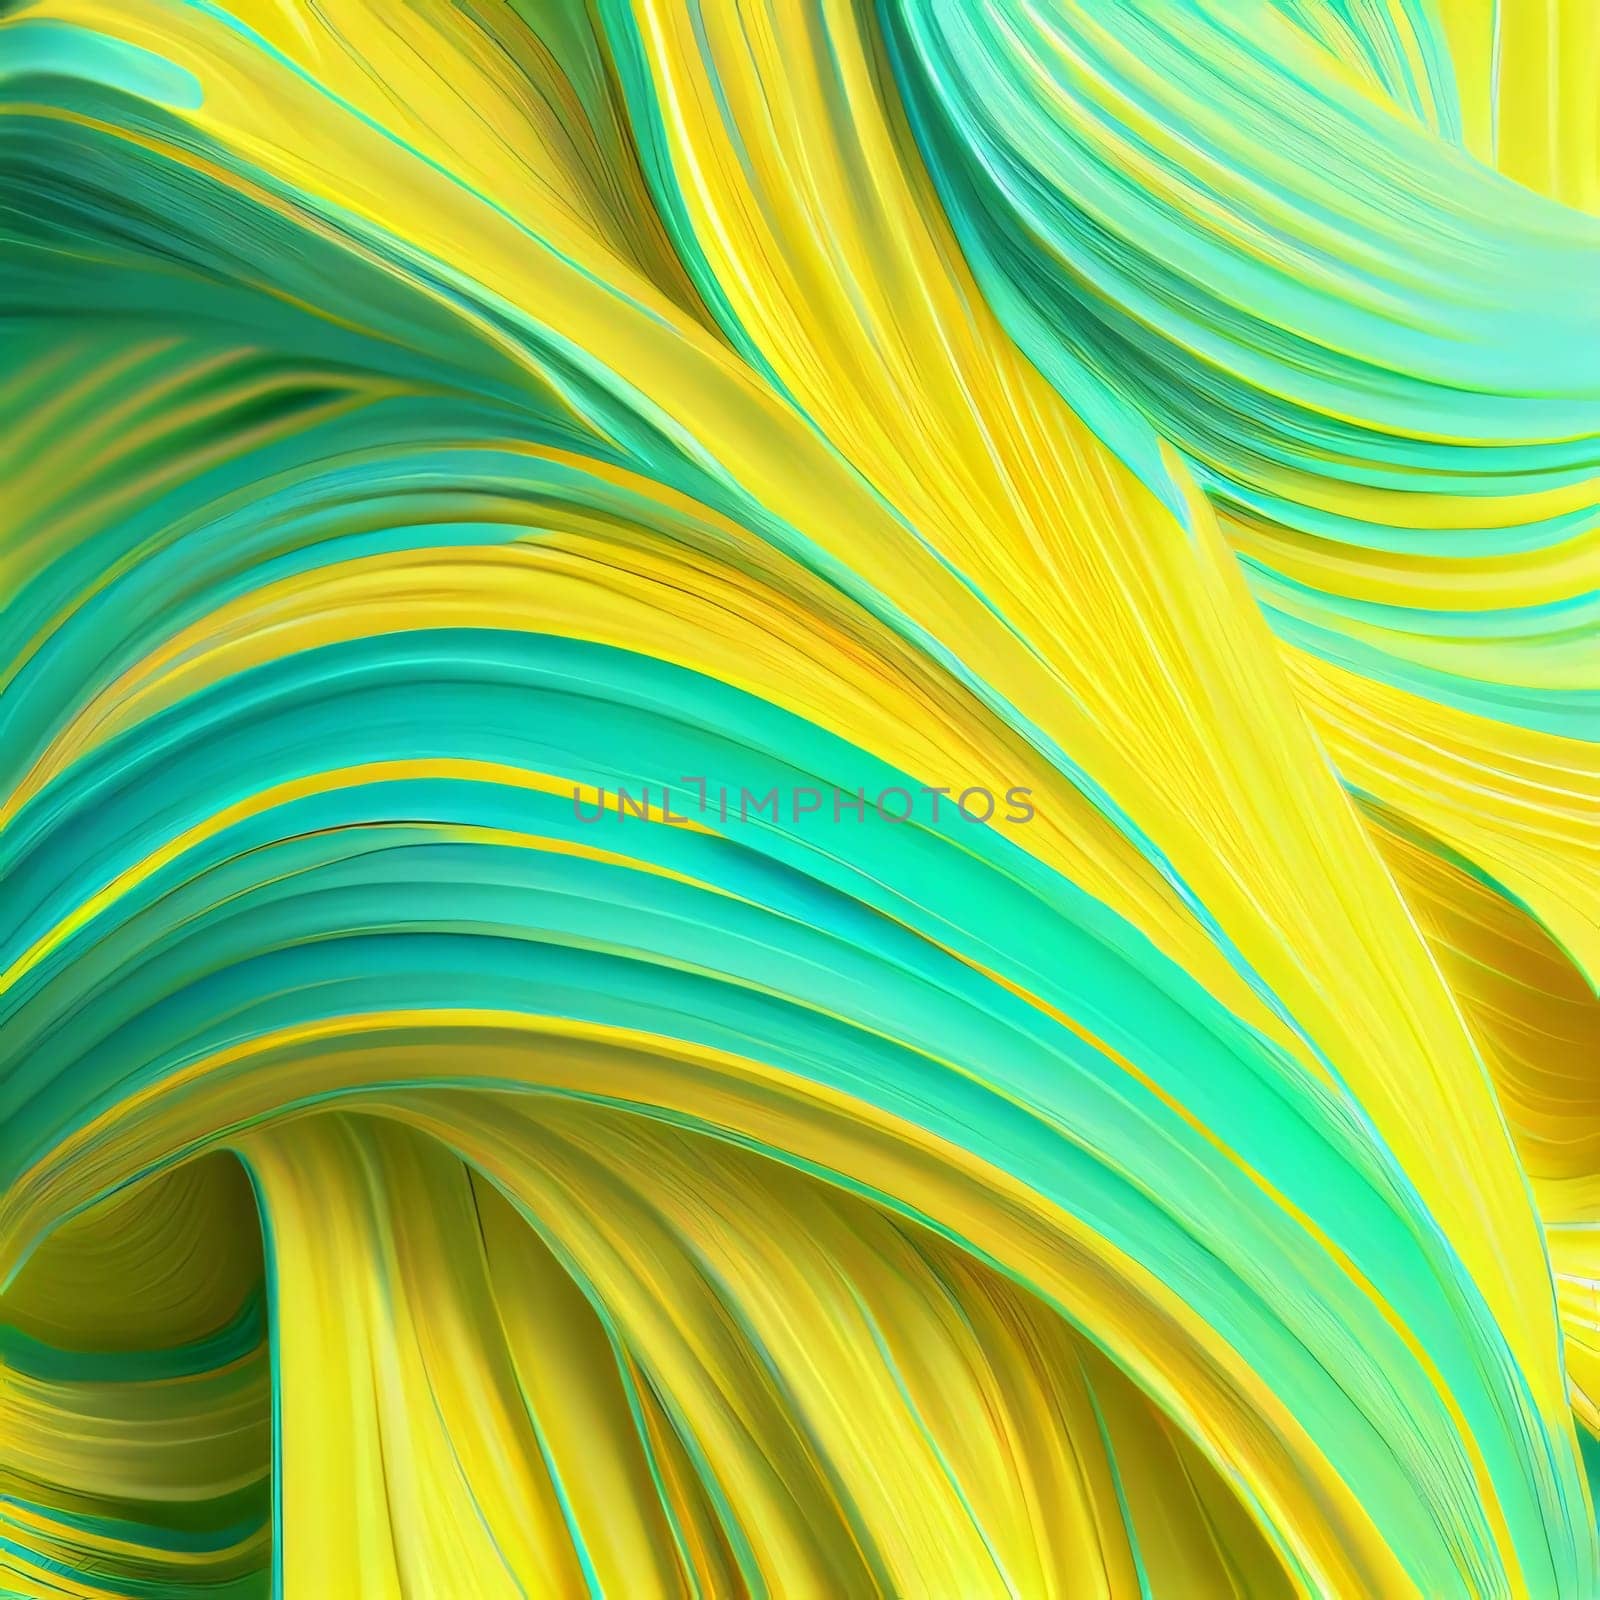 Abstract background design: abstract background with smooth wavy lines in green and yellow colors